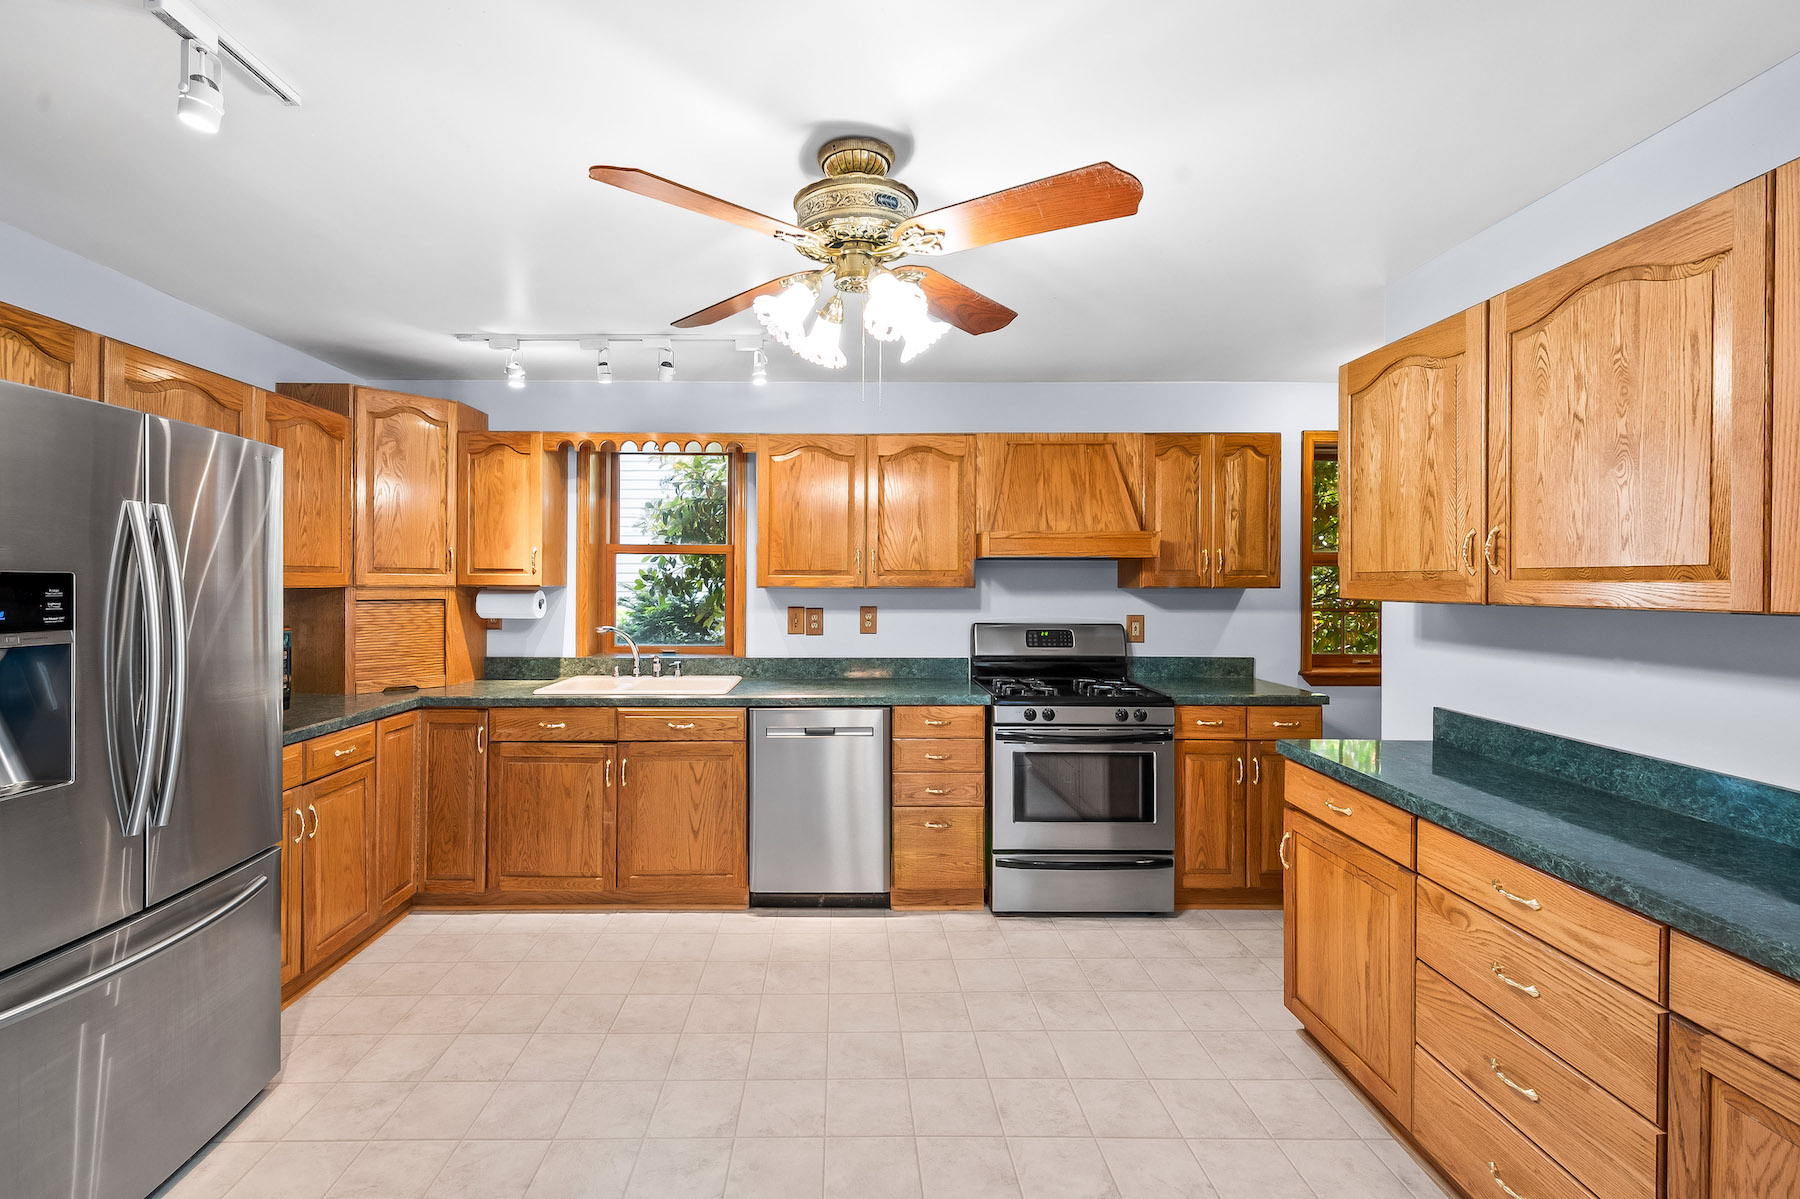 1246 S 48th St, kitchen with track lighting and ceiling fan with 4 lights.